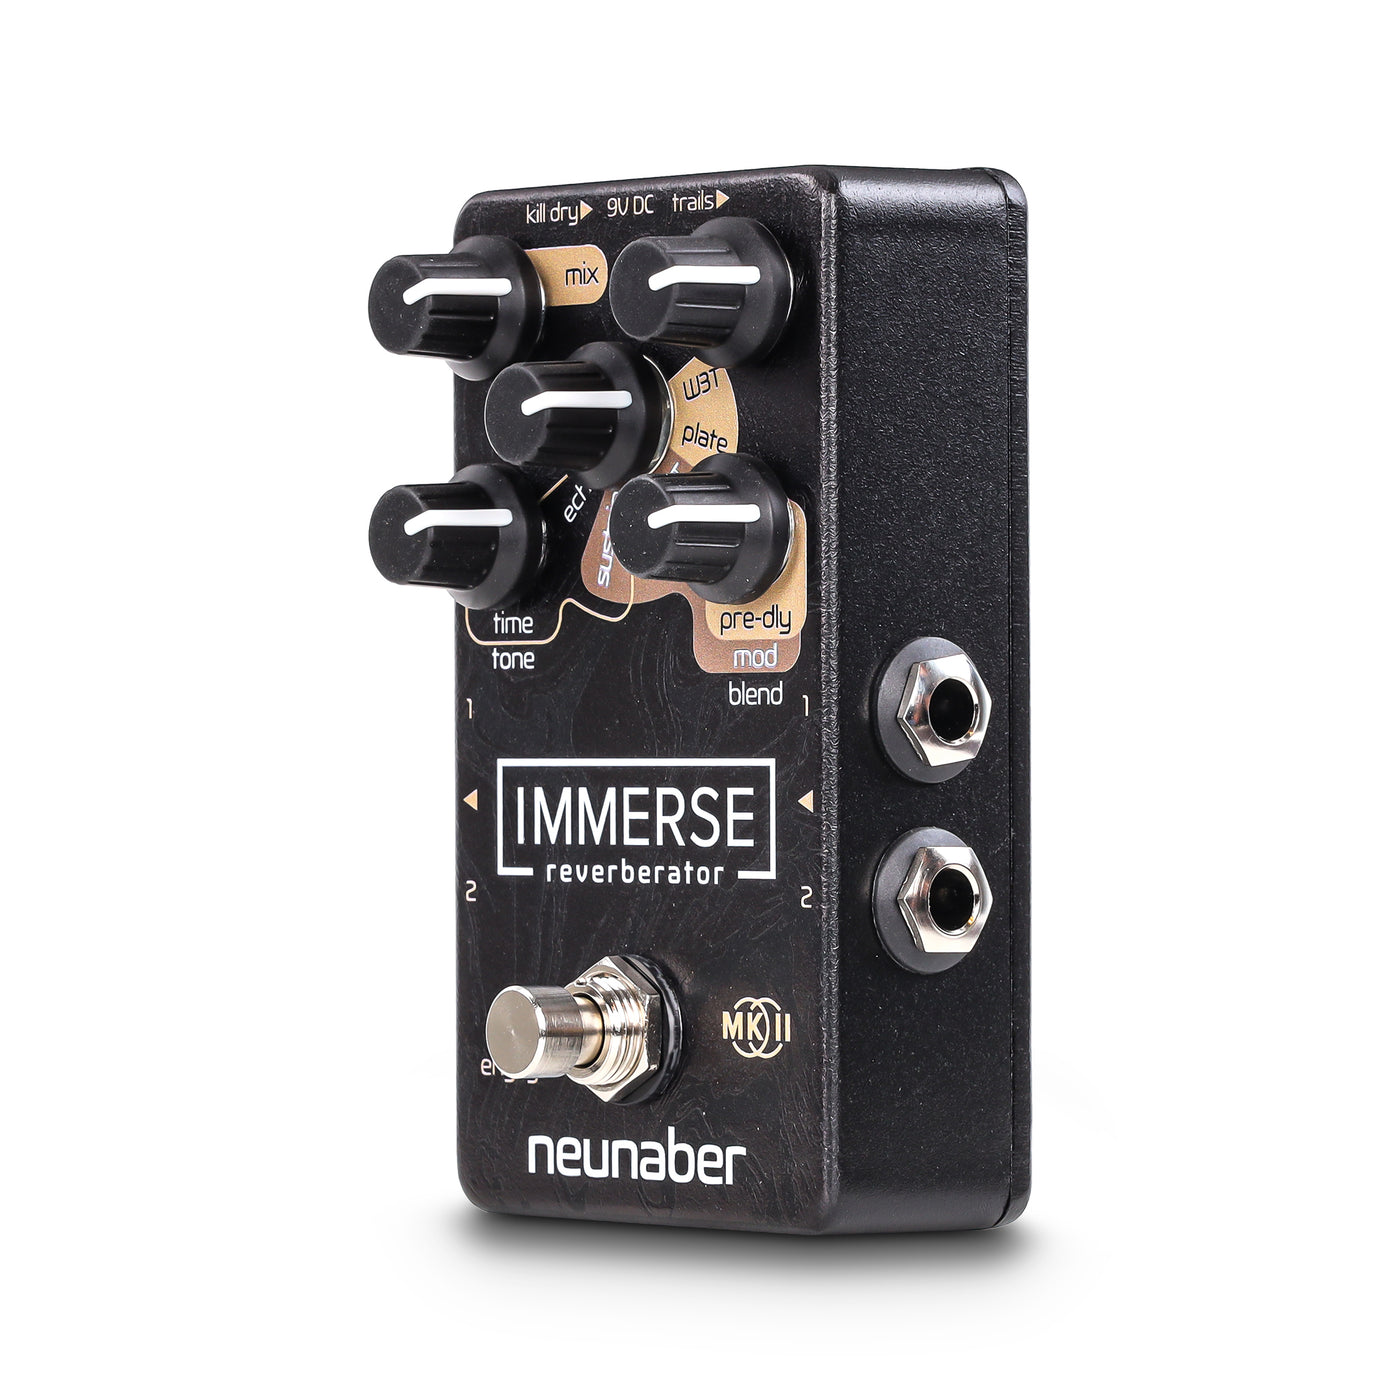 Neunaber Immerse pedal facing diagonally to the left